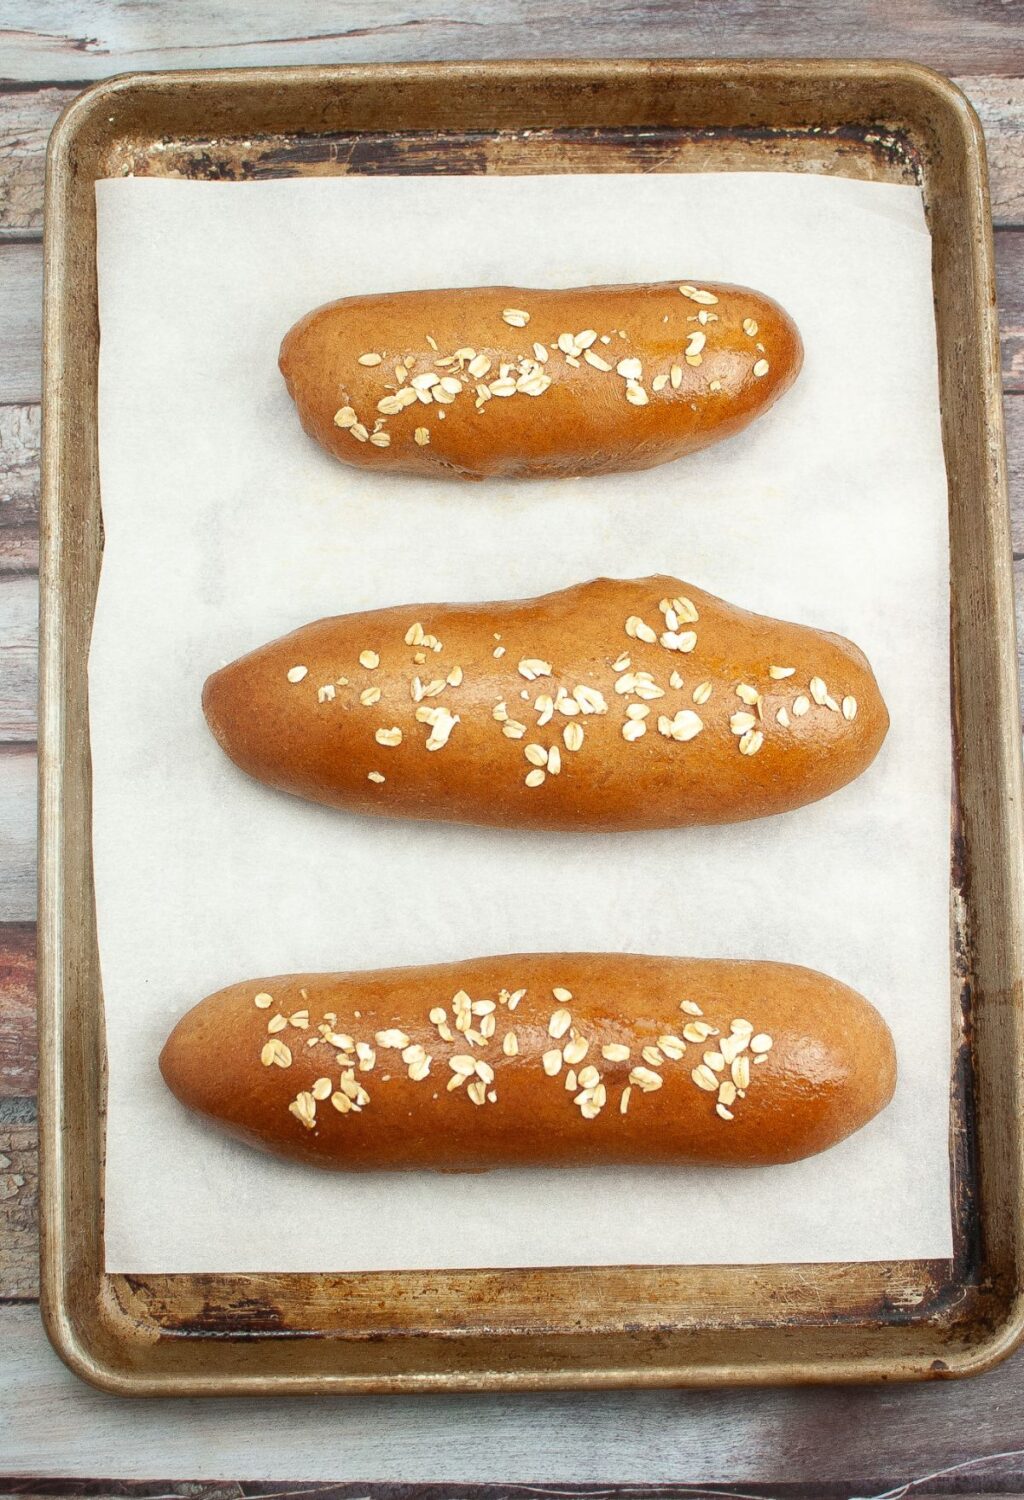 Three hot dogs on a baking sheet with oats on top.